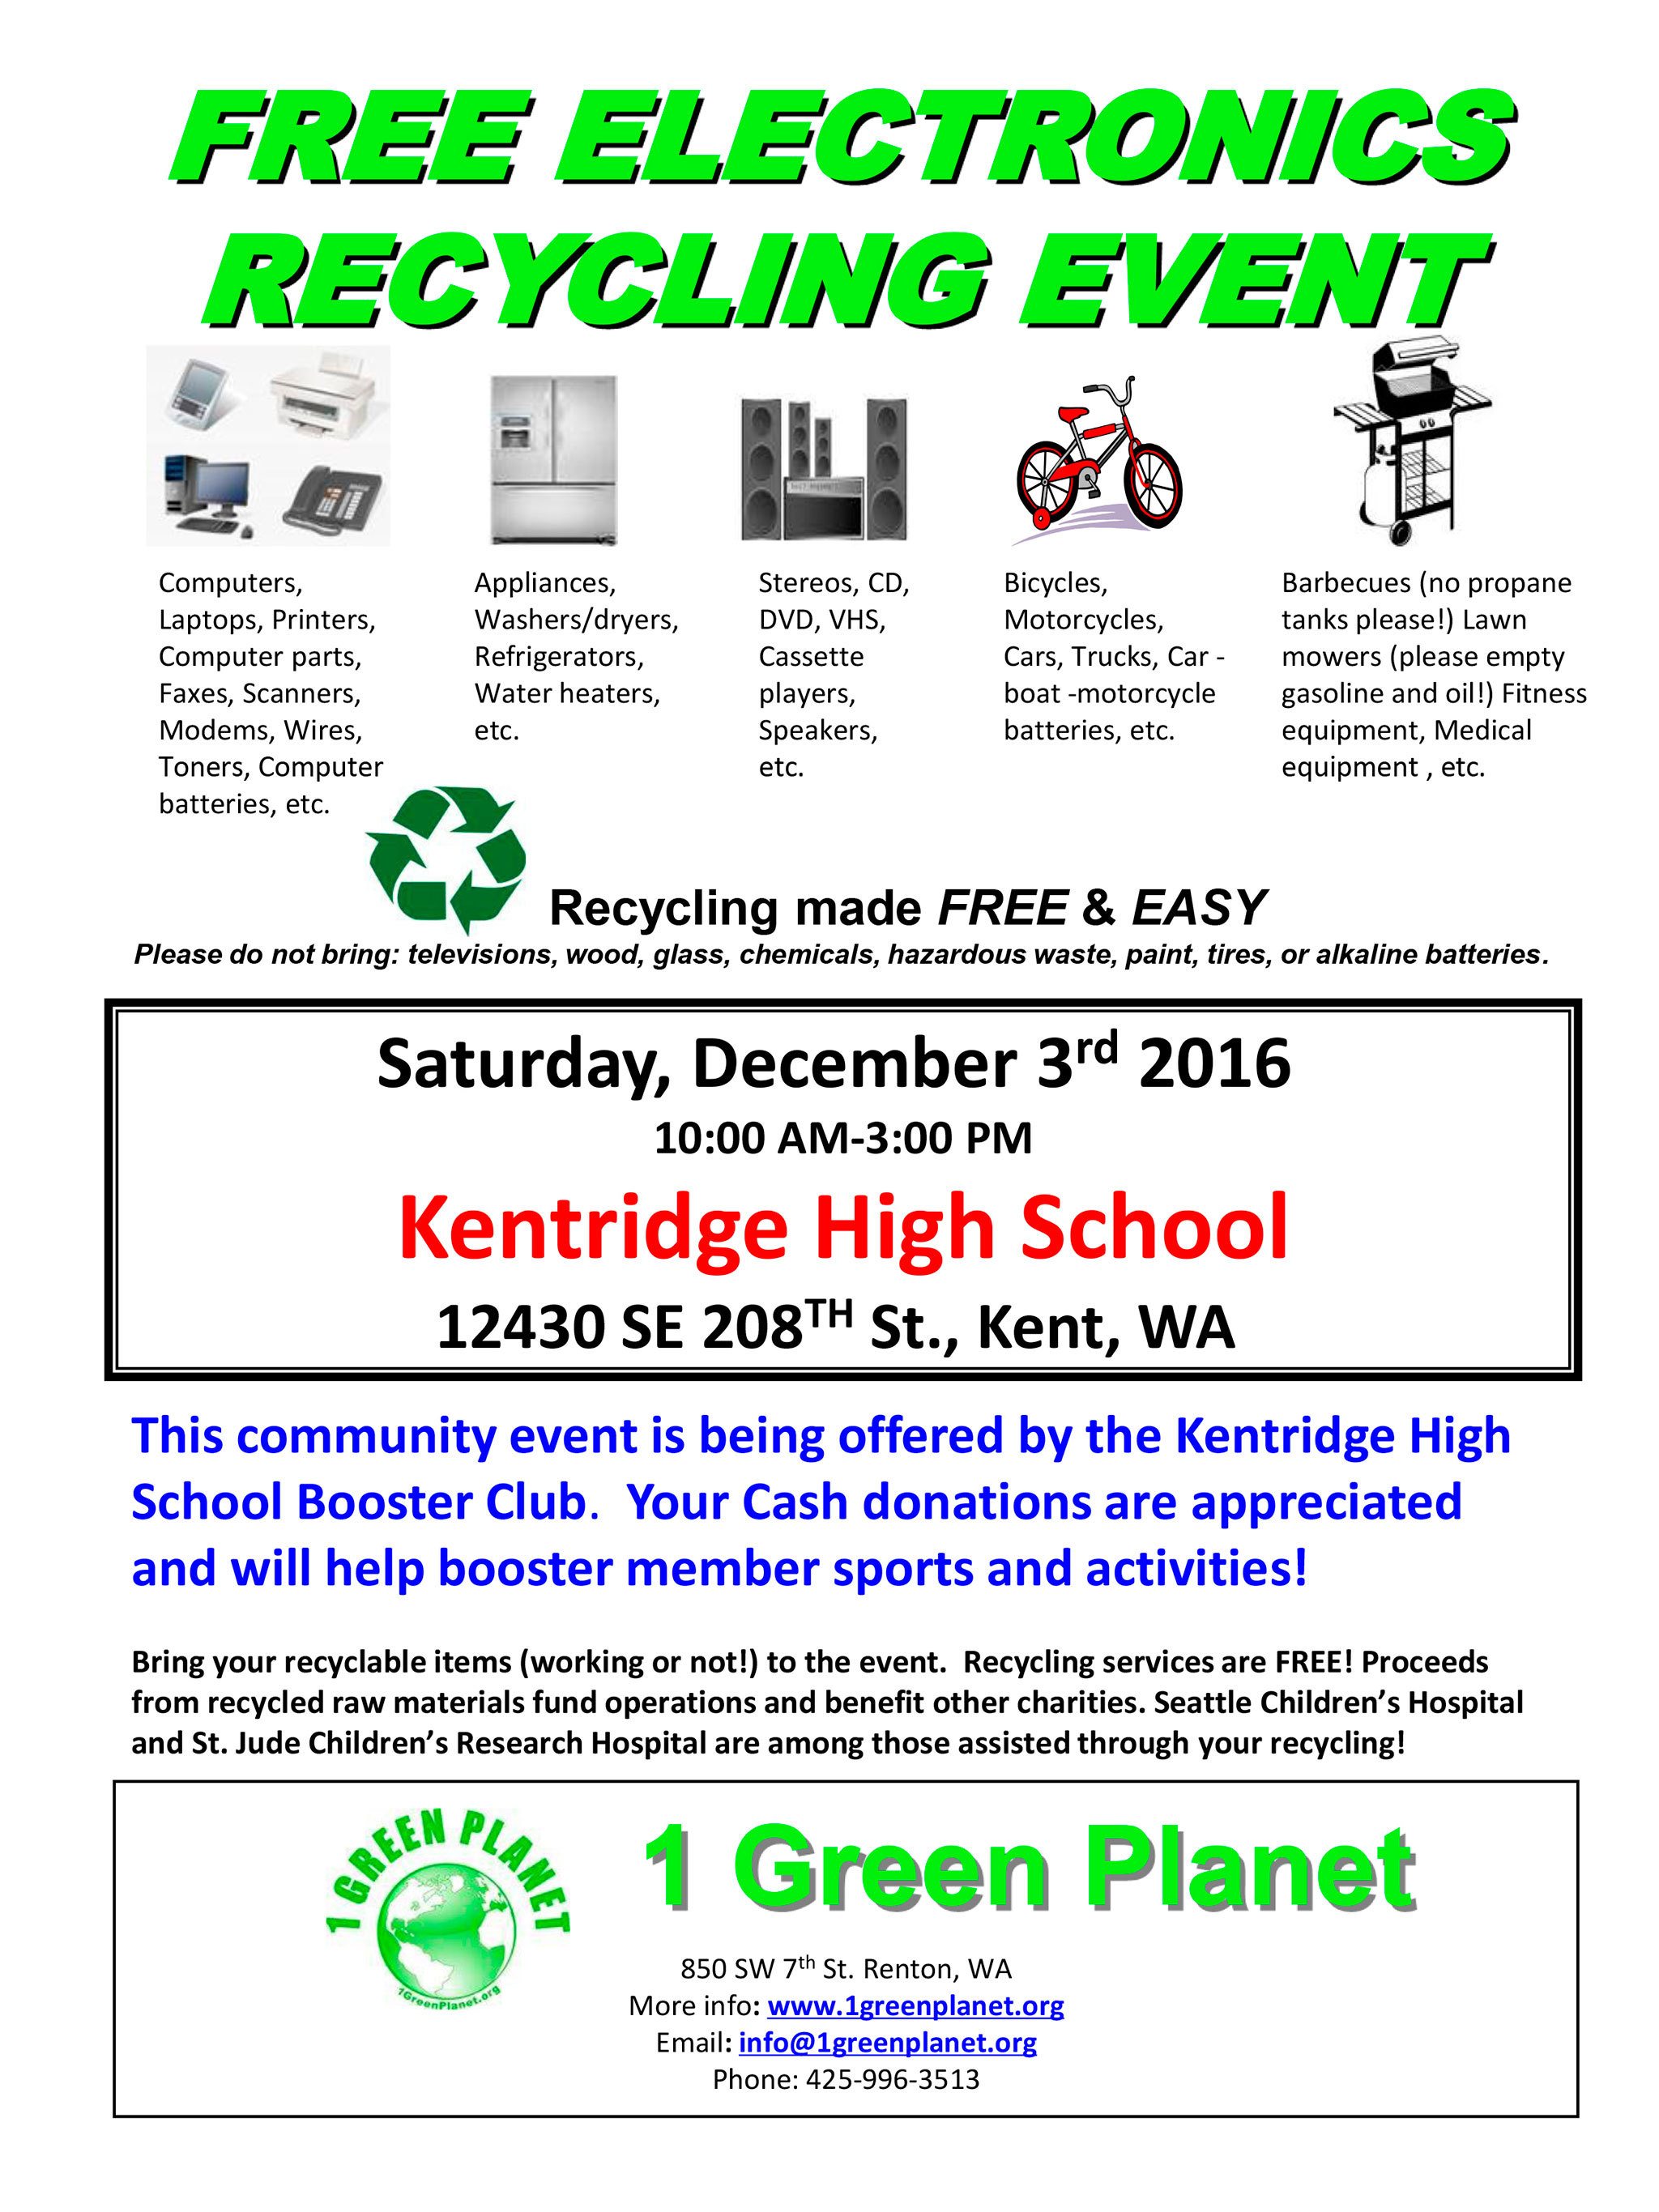 Kentridge High School Booster Club teams up with 1 Green Planet